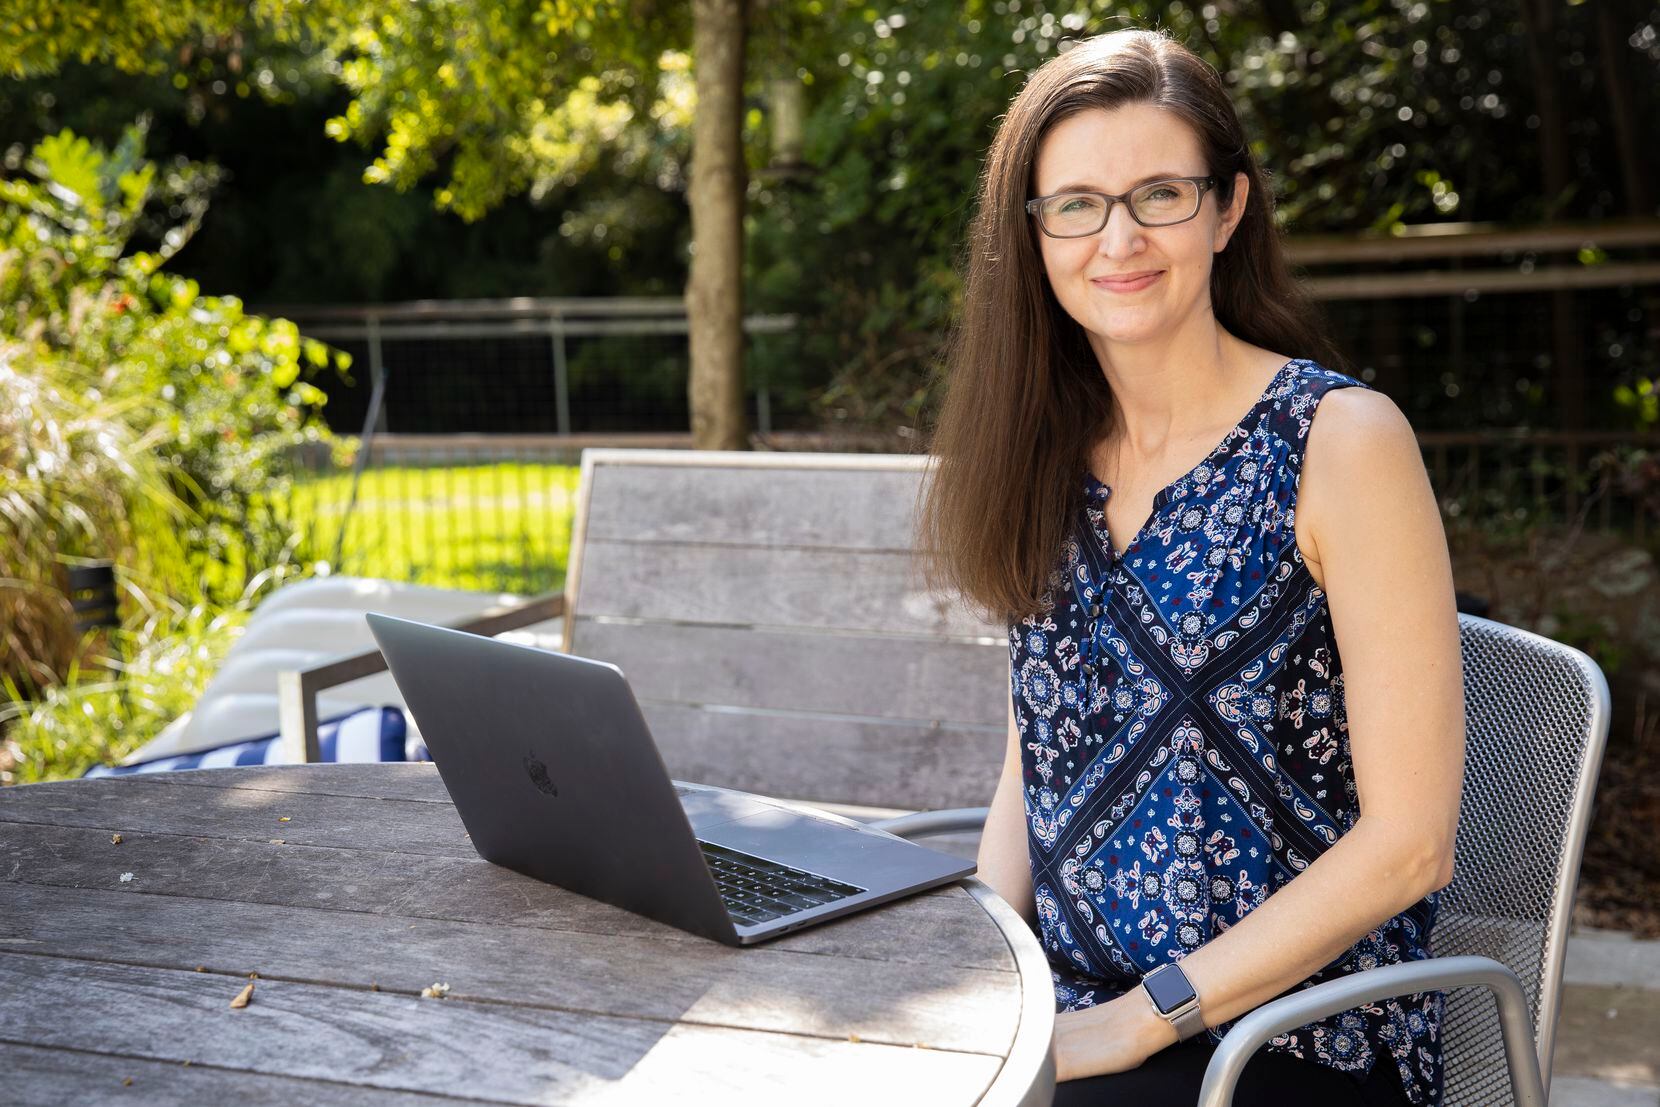 Candice Mills, a psychologist that studies how young children think, poses for a photo on her backyard patio where she sometimes works on Aug. 7, 2020 in Dallas, Texas. Mills normally conducts her studies in person but, due to COVID-19 restrictions, has shifted to working from home. (Juan Figueroa/ The Dallas Morning News)